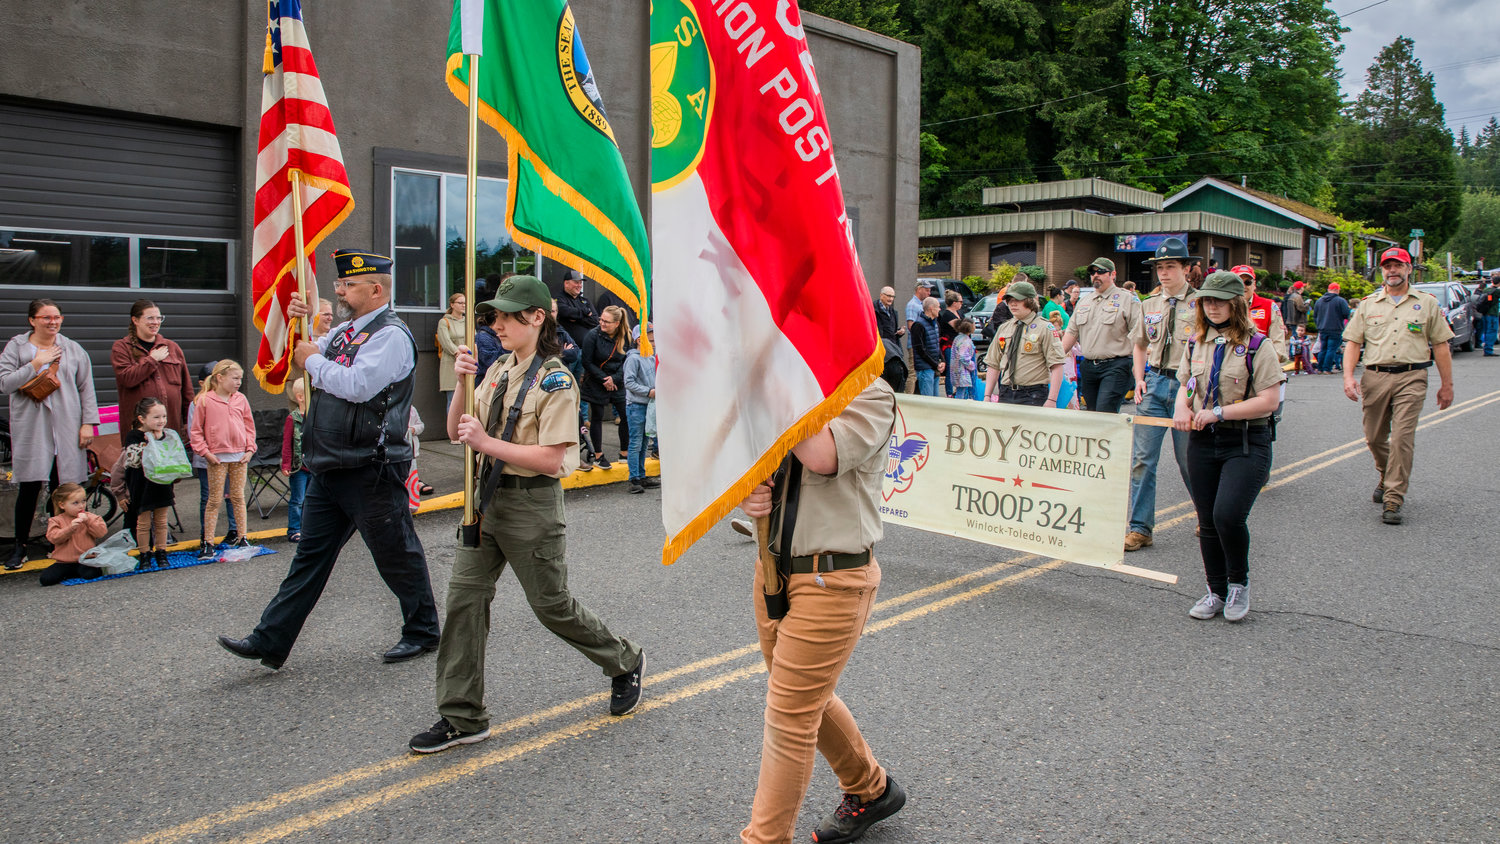 A color guard walks with flags in front of Winlock-Toledo Troop 324 during the Egg Days Festival parade on Saturday.